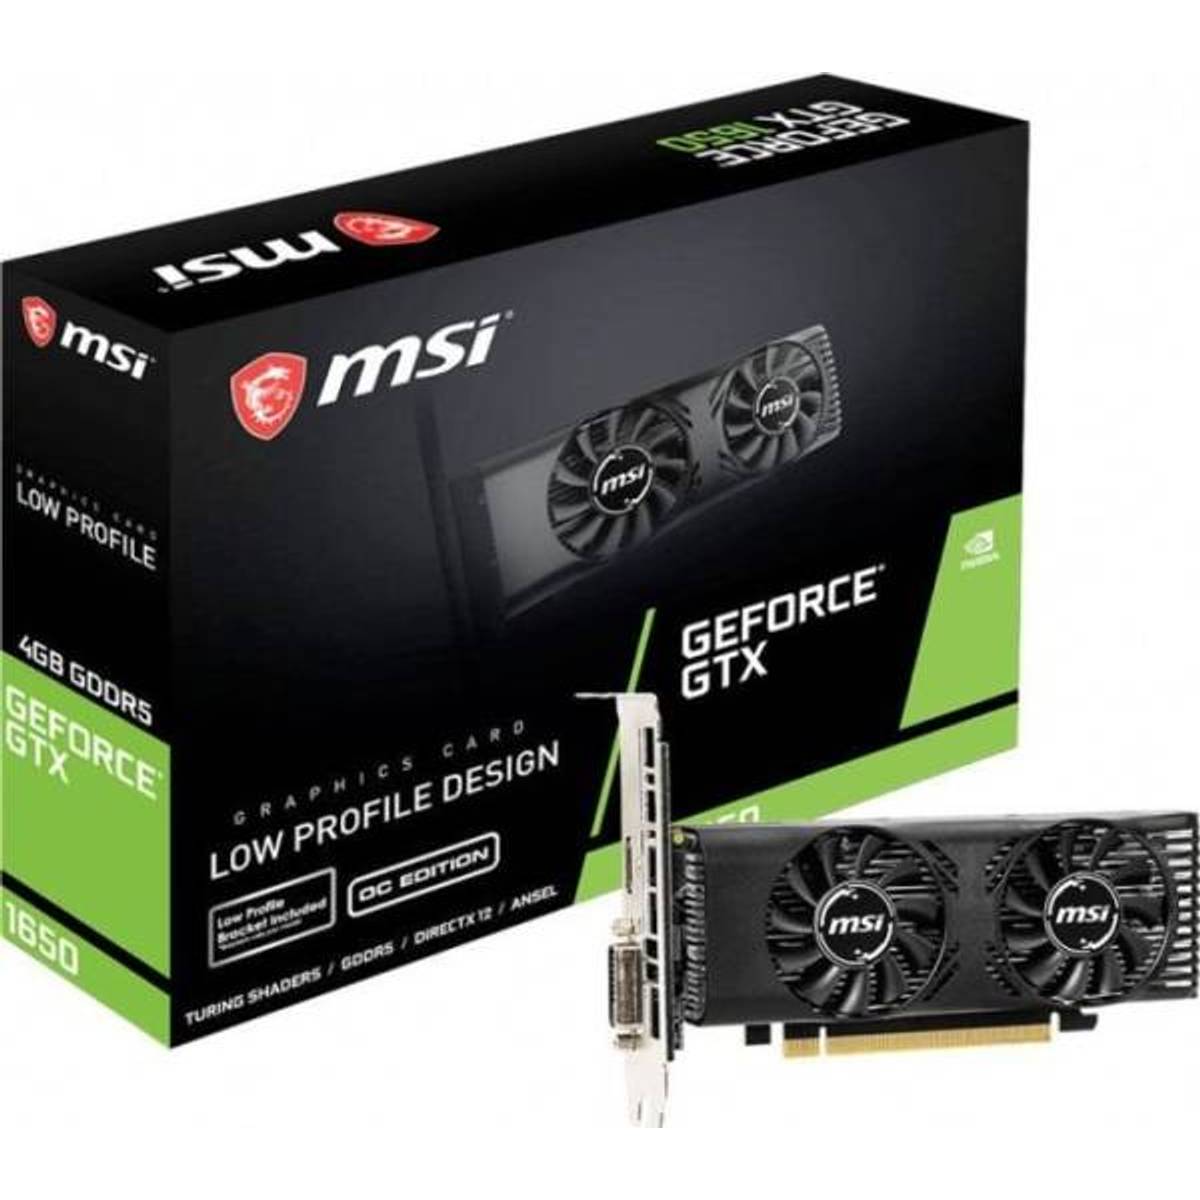 Geforce 1650 low profile • Find the lowest price on PriceRunner